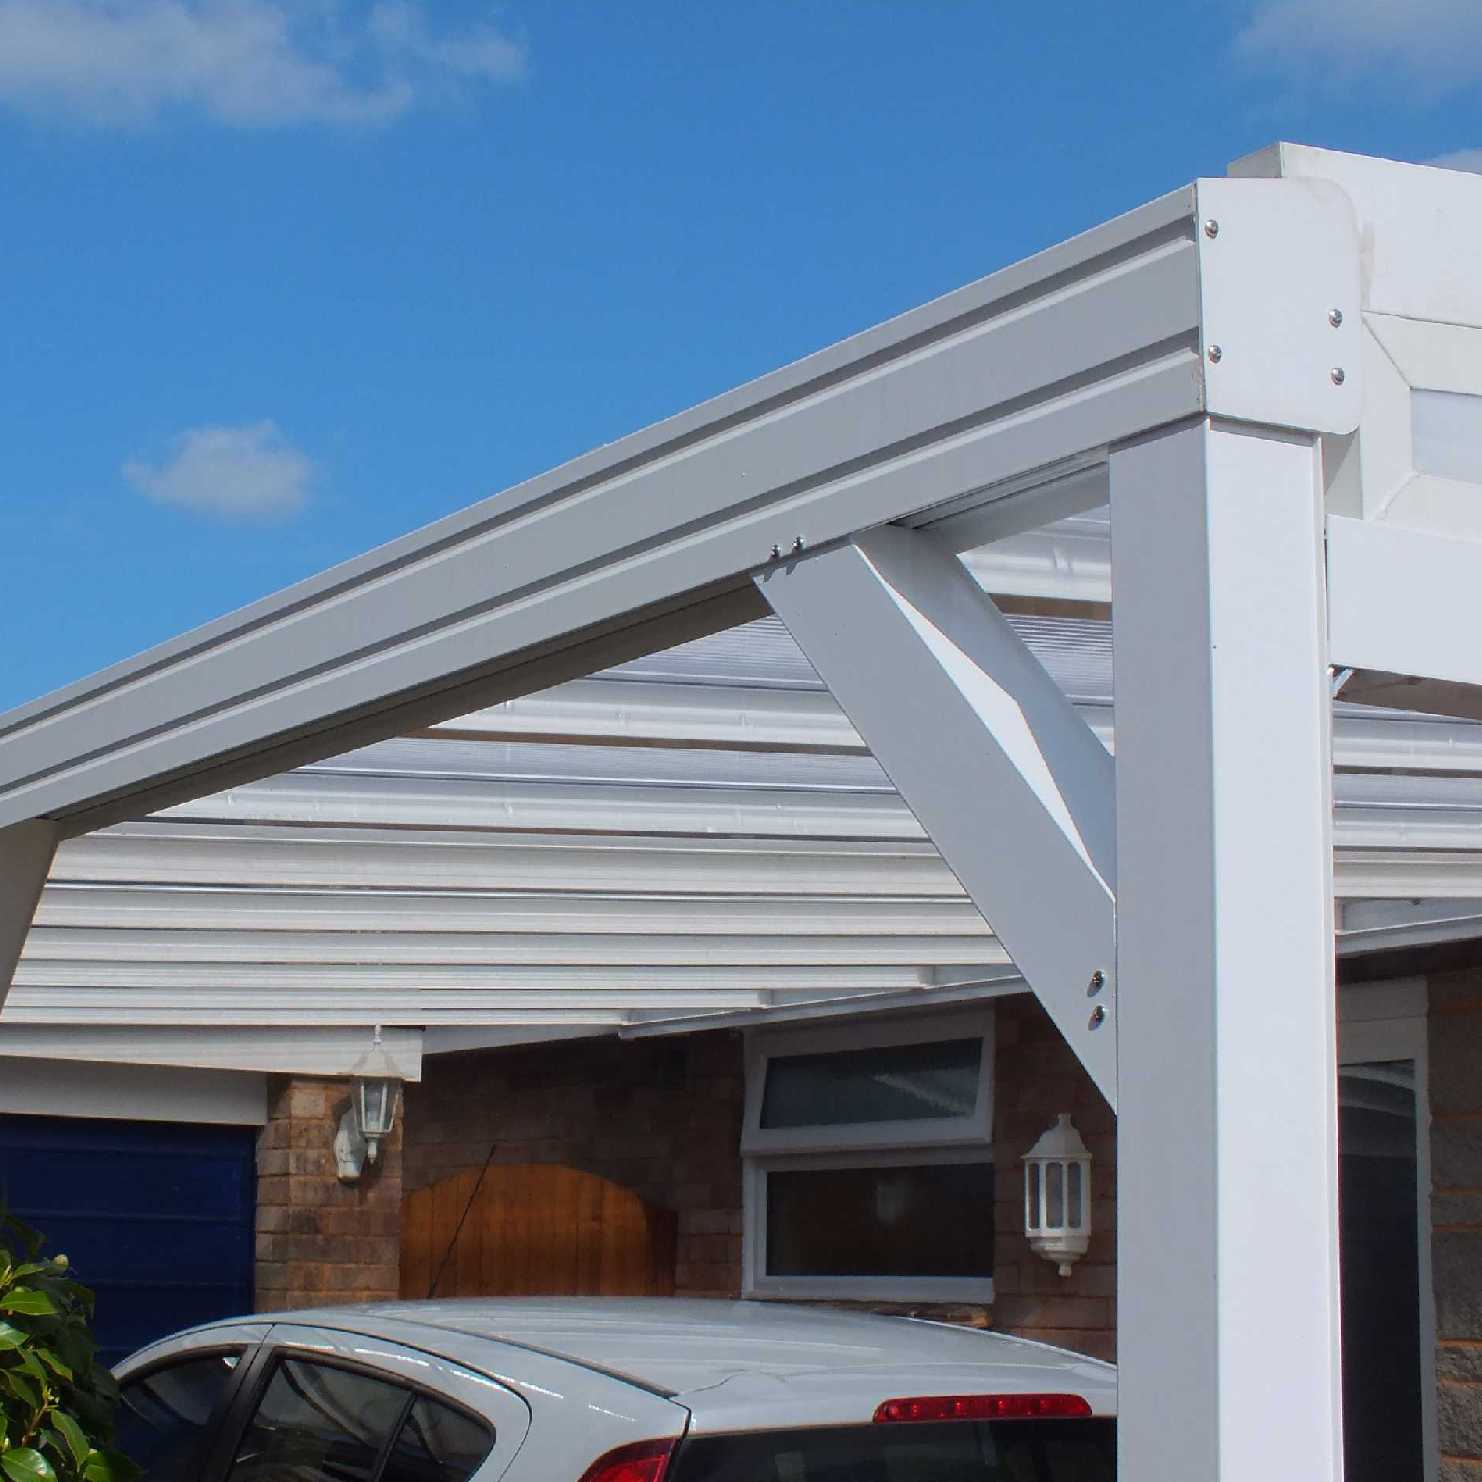 Great deals on Omega Smart Lean-To Canopy, White with 16mm Polycarbonate Glazing - 6.0m (W) x 4.5m (P), (3) Supporting Posts